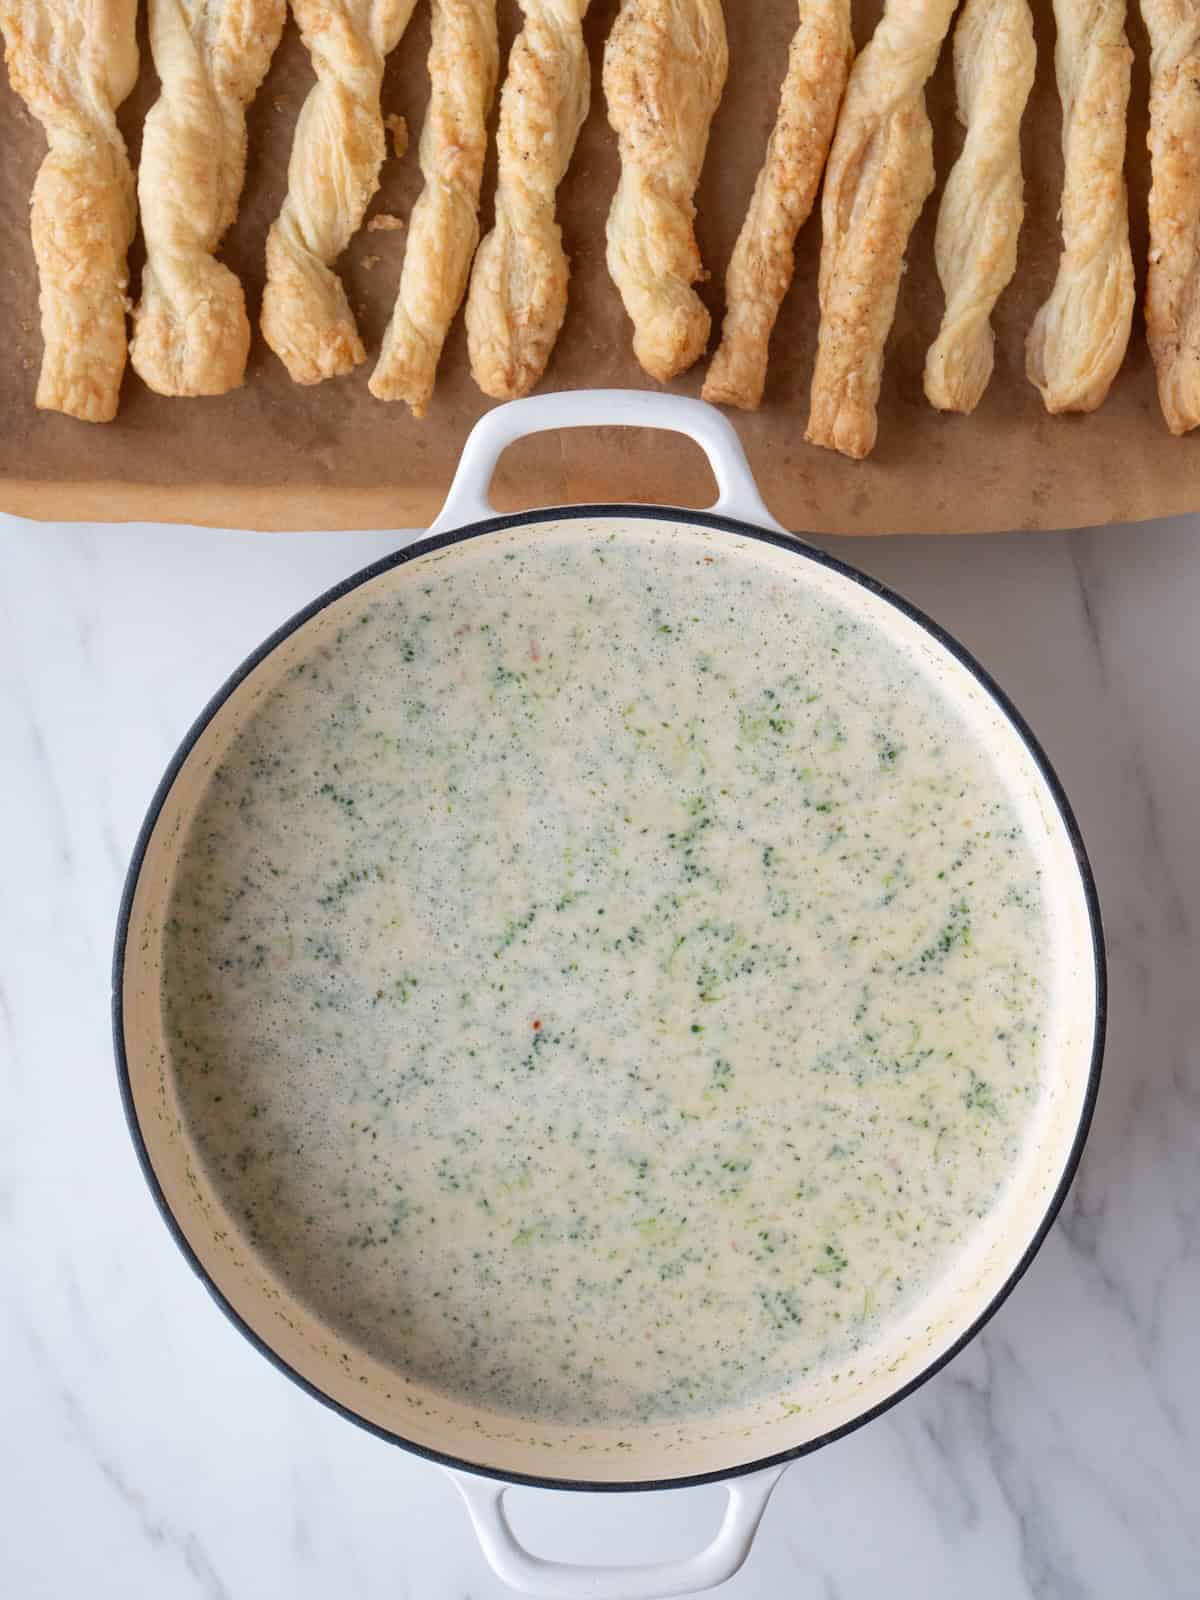 A dutch oven with broccoli cheddar soup and a baking sheet with puff pastry cheese straws on the side.